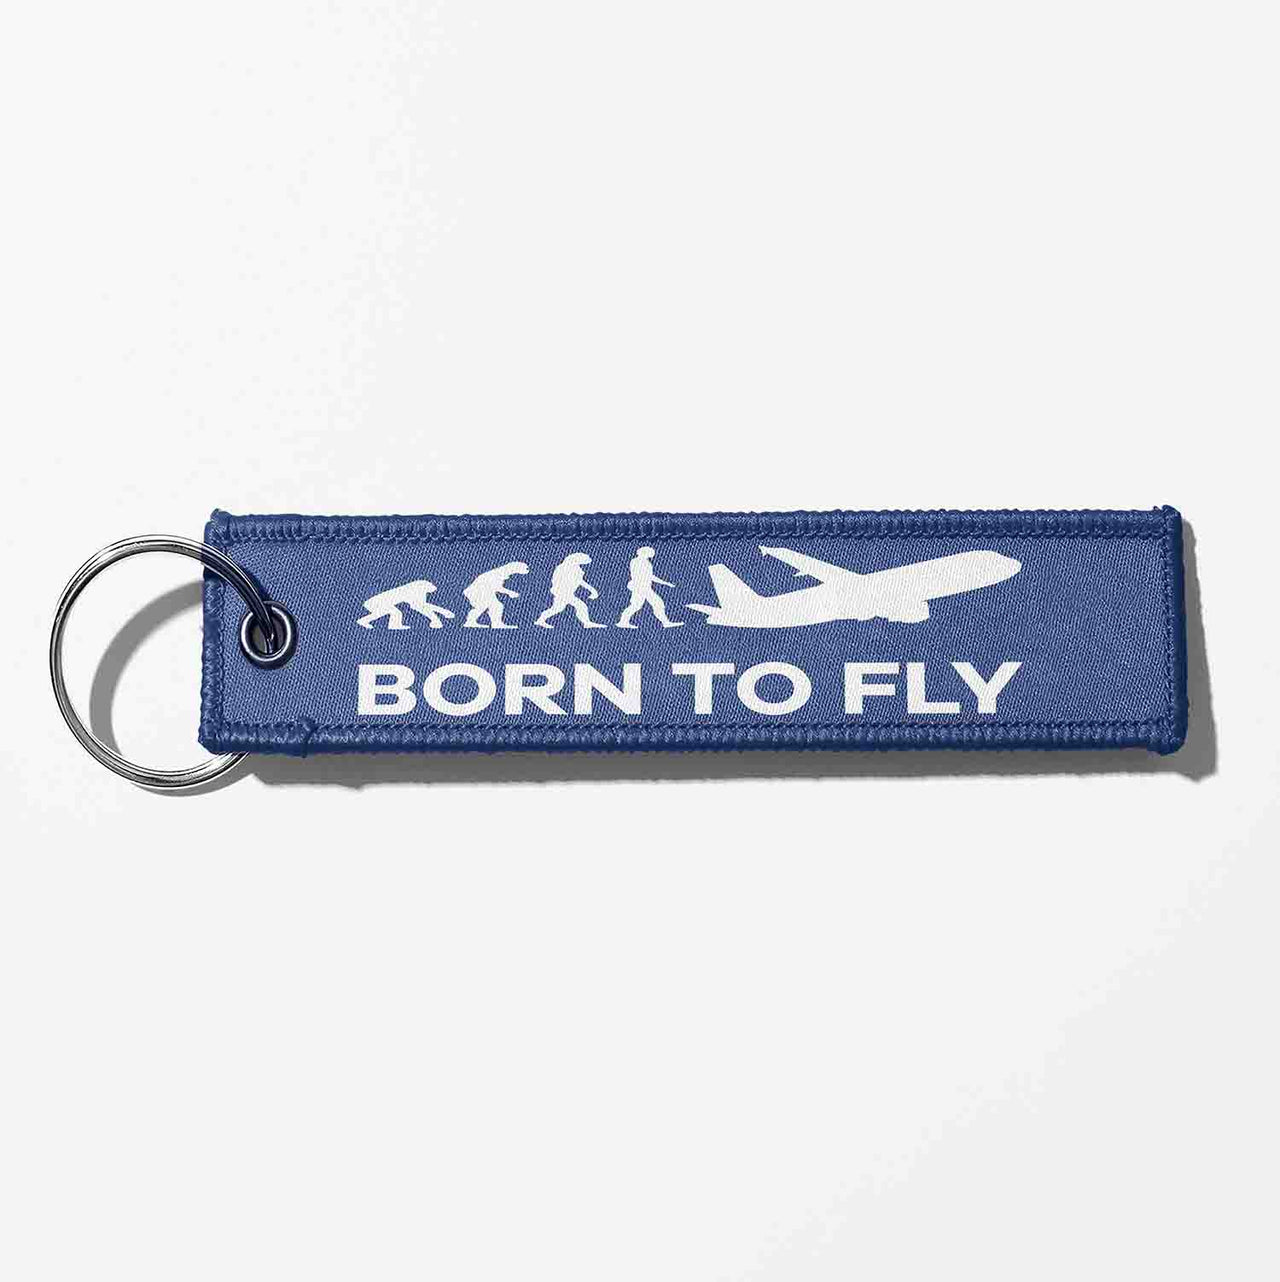 Born To Fly Designed Key Chains